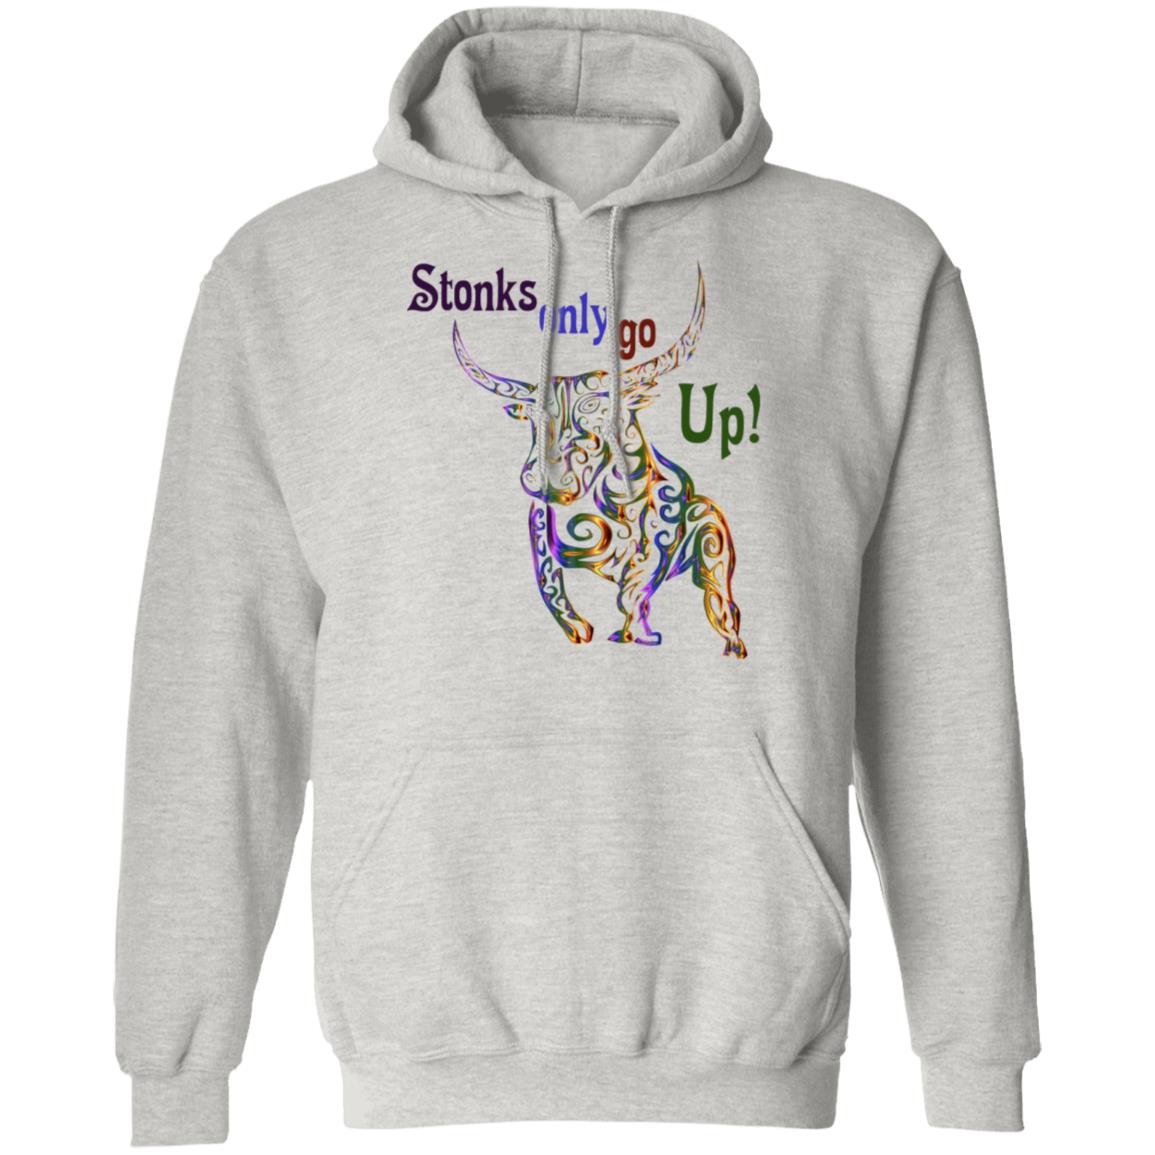 Stonks Only Go Up - Pullover Hoodies & Sweatshirts